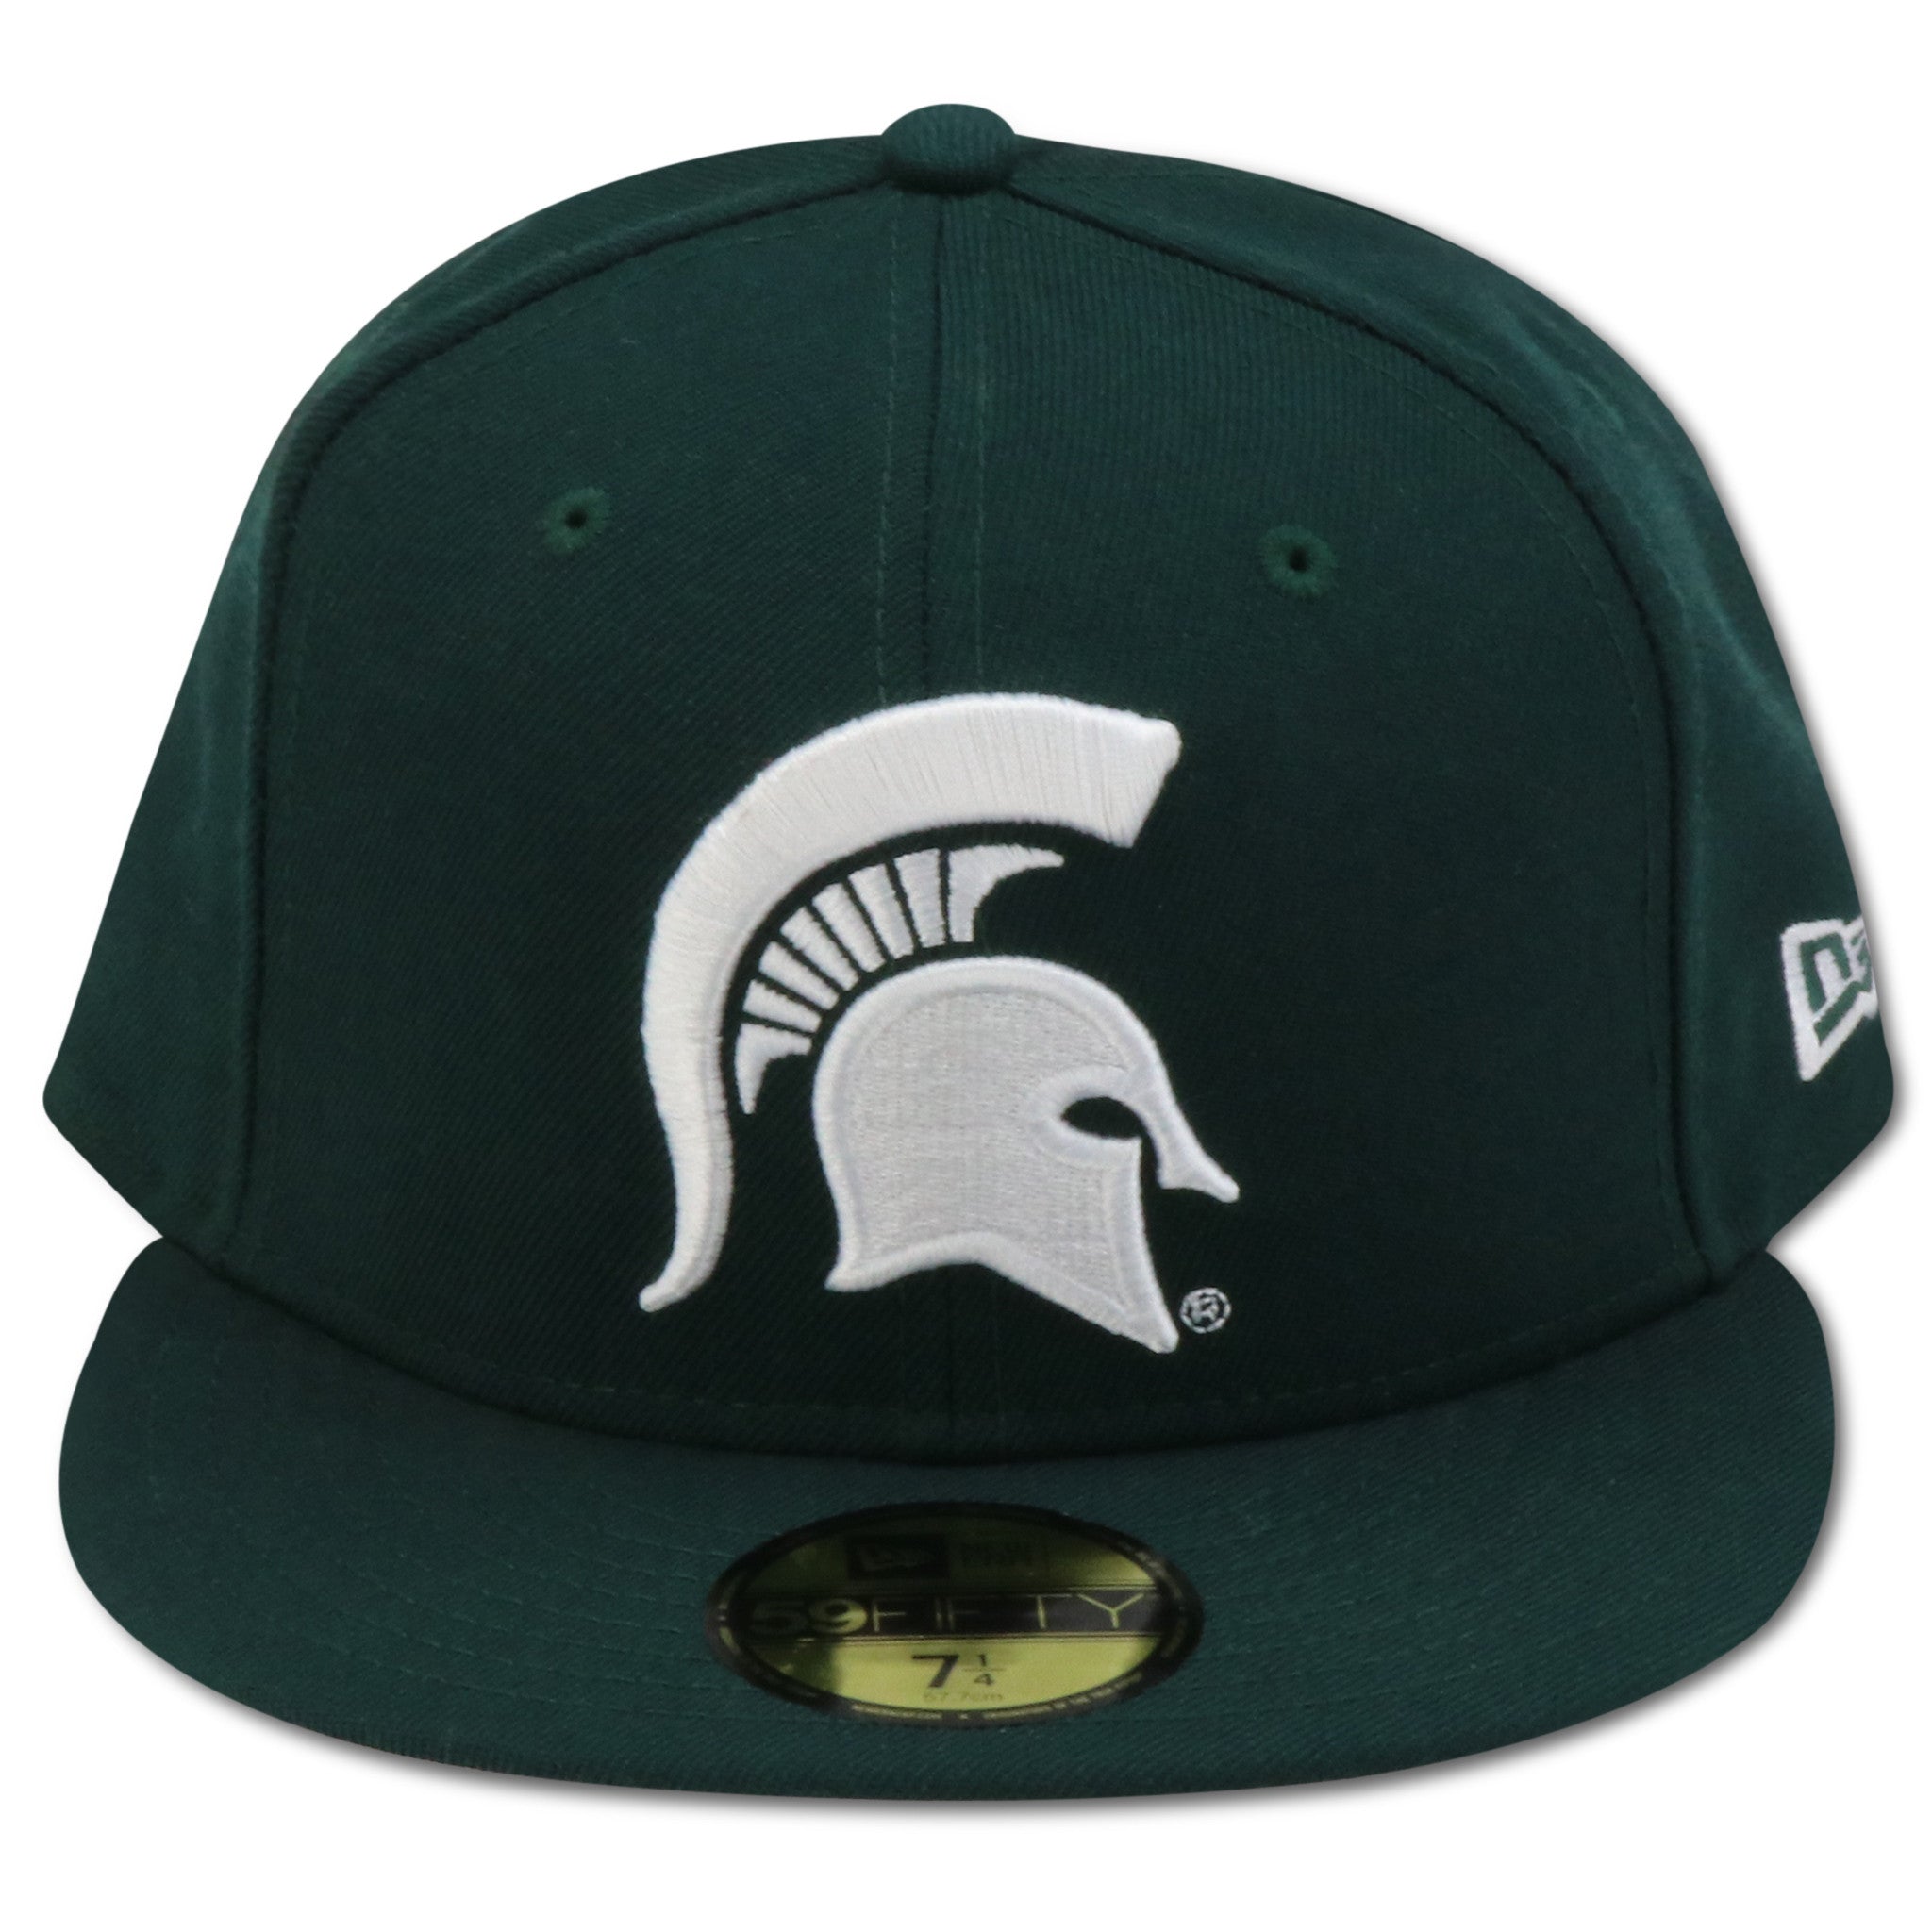 MICHIGAN STATE SPARTAN NEW ERA 59FIFTY FITTED